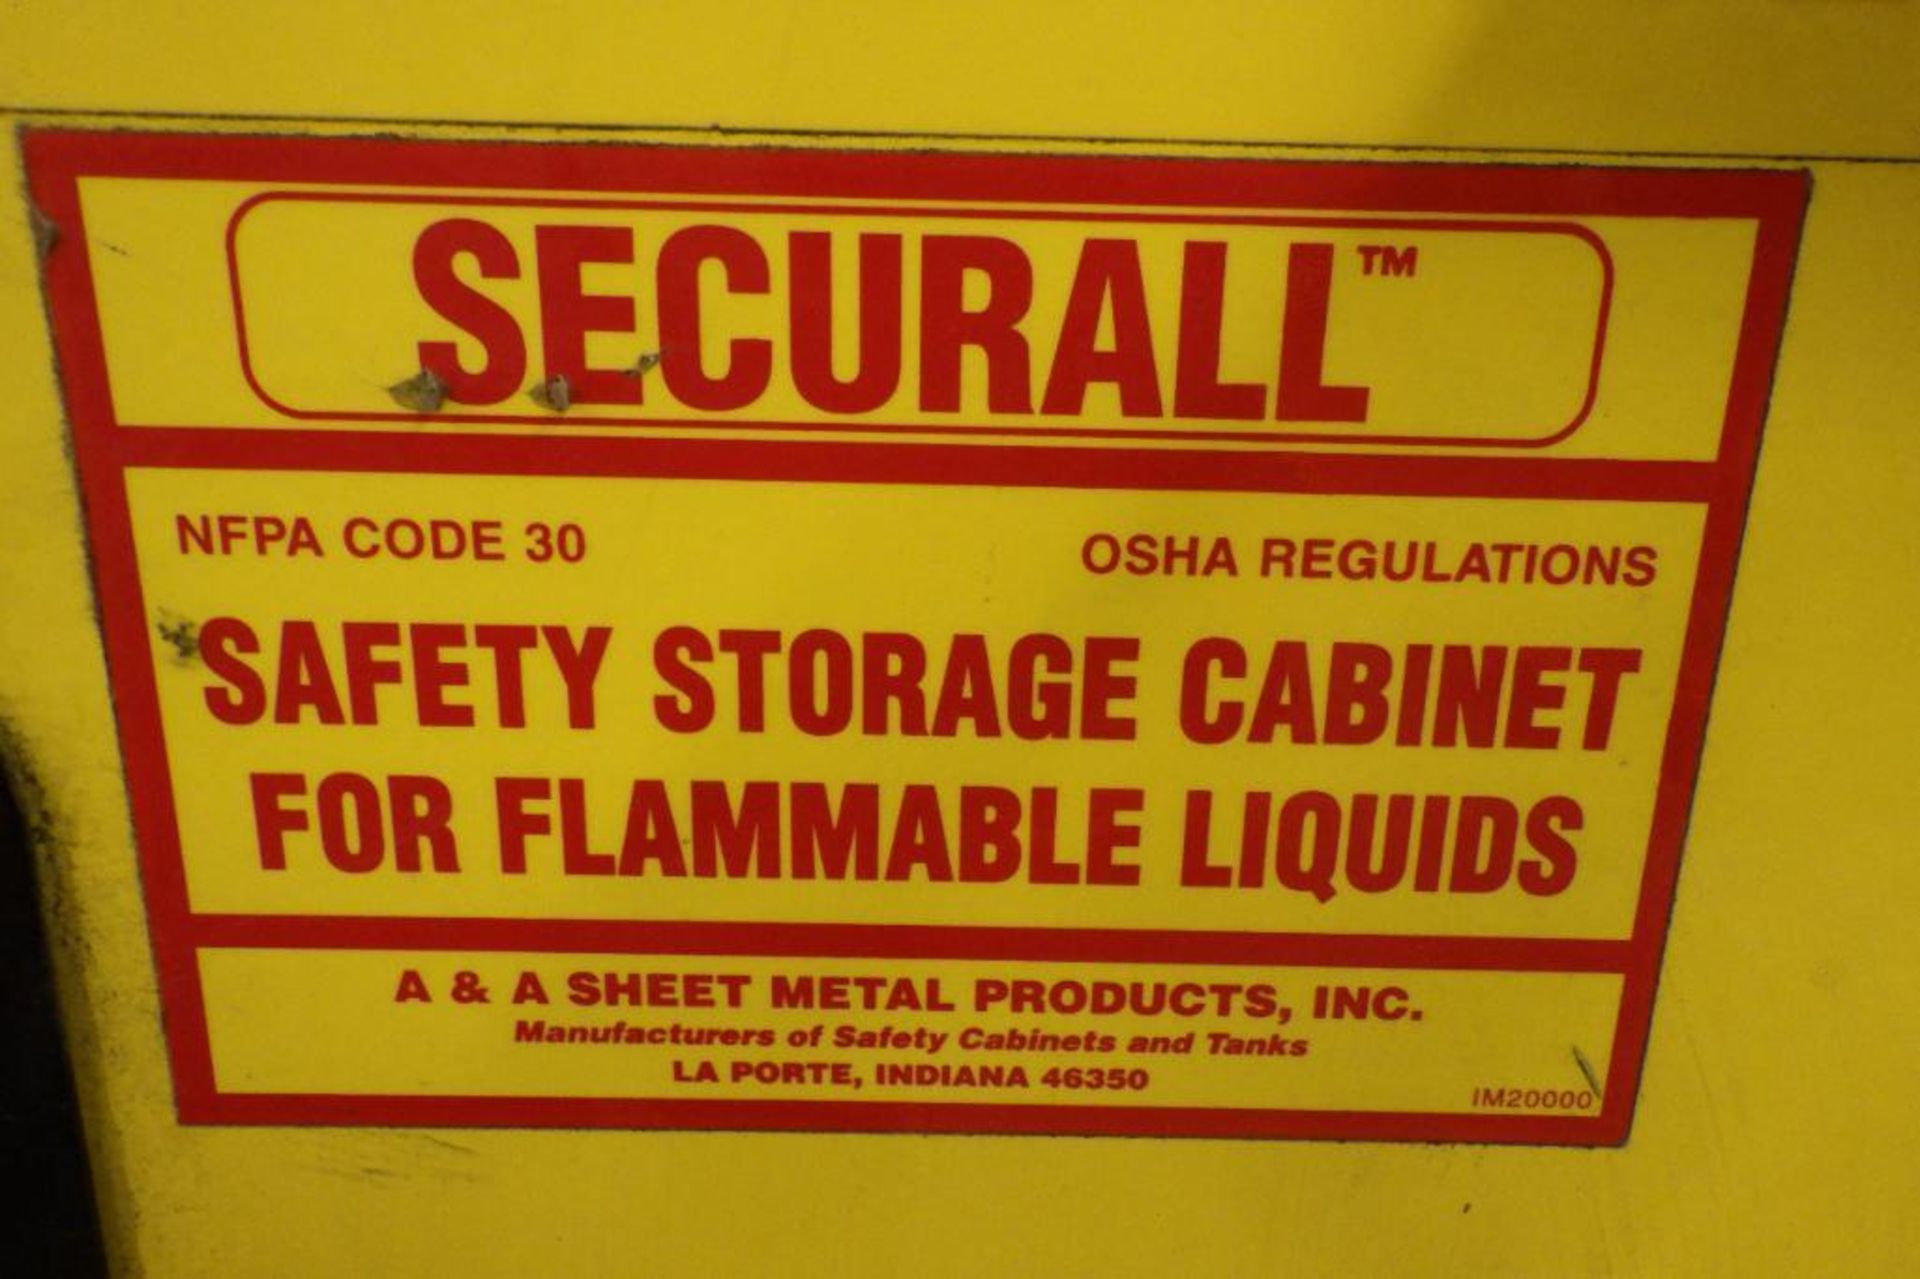 Securall flammable storage cabinet - Image 5 of 5